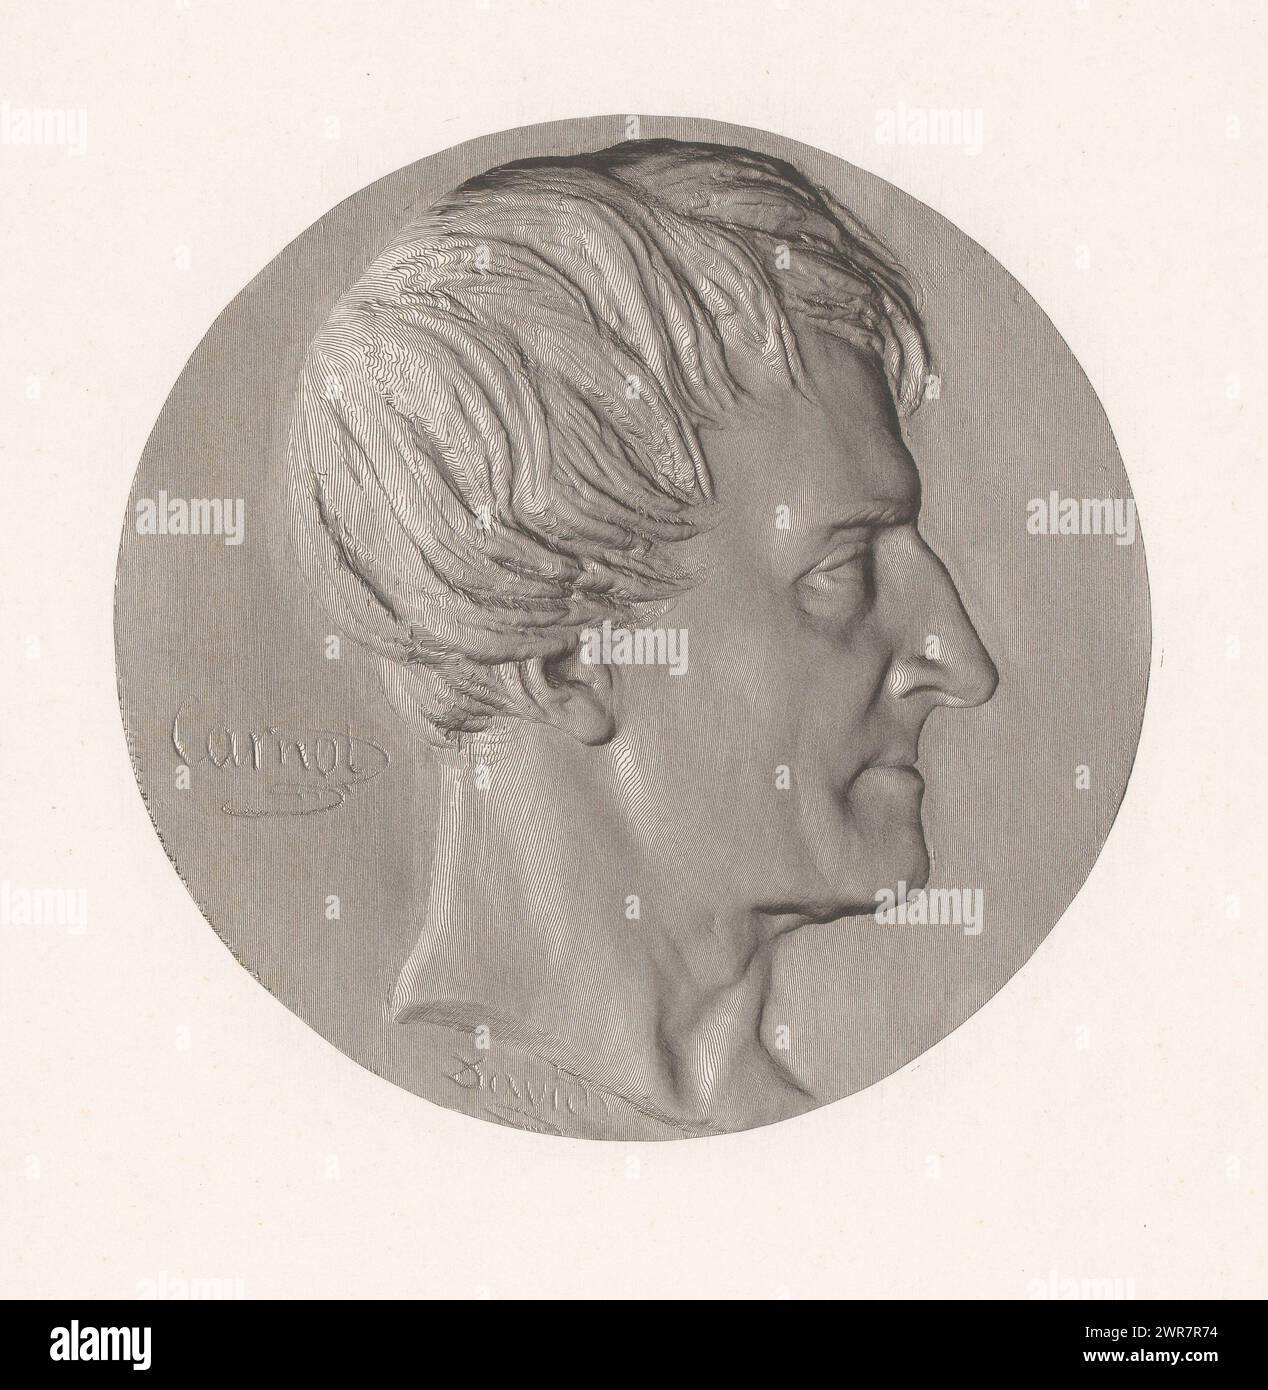 Medallion with portrait of Lazare Carnot, Carnot (title on object), Series of medallions with prominent figures from the early nineteenth century (series title), print maker: Achille Collas, (possibly), Pierre Jean David d'Angers, France, 1820 - 1840, paper, height 232 mm × width 218 mm, print Stock Photo